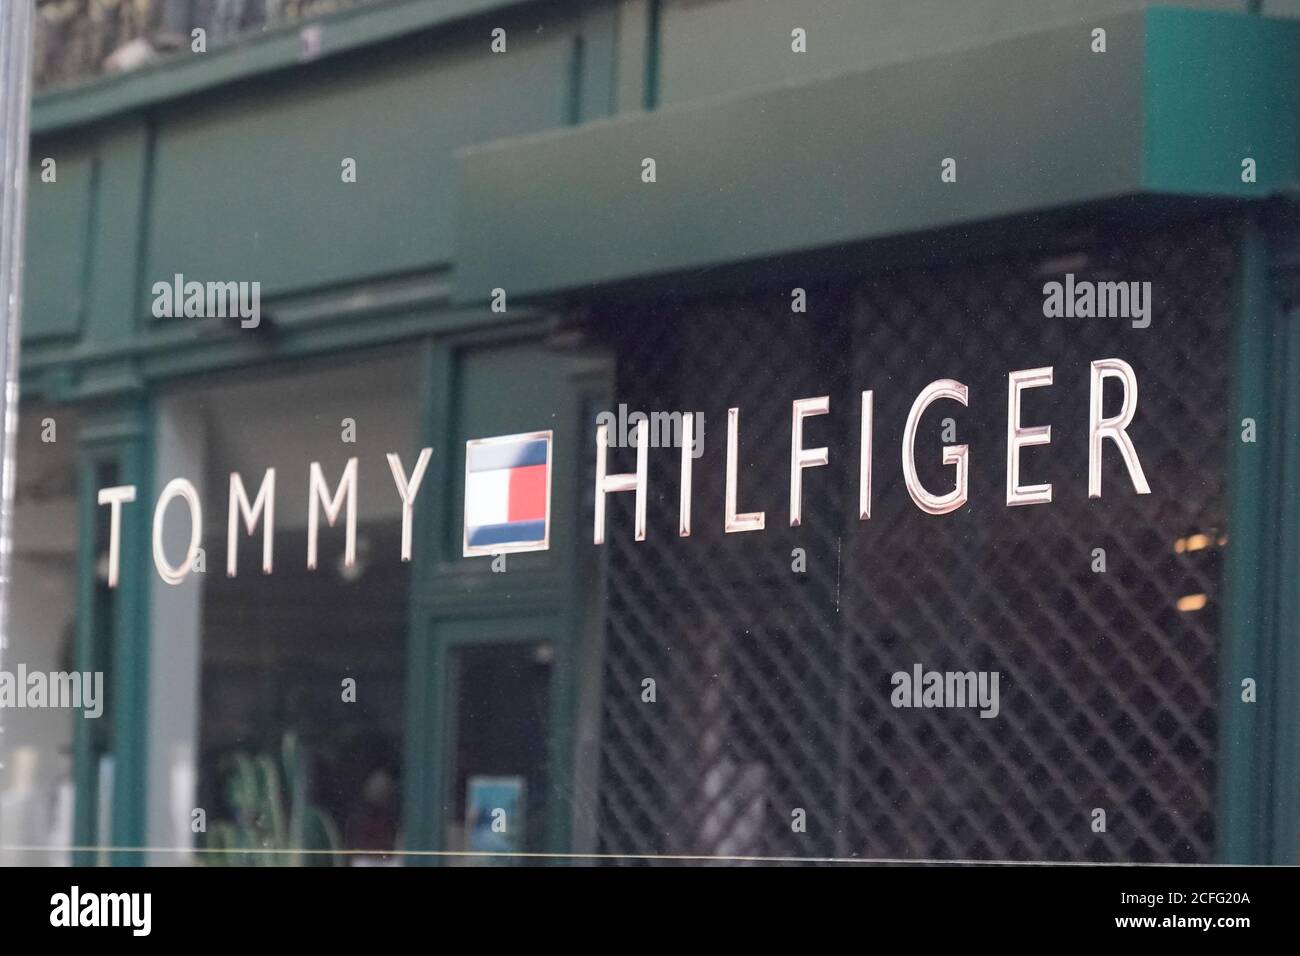 Bordeaux , Aquitaine / France - 09 01 2020 : tommy Hilfiger sign flag and  text logo store front of American clothing company fashion men shop Stock  Photo - Alamy